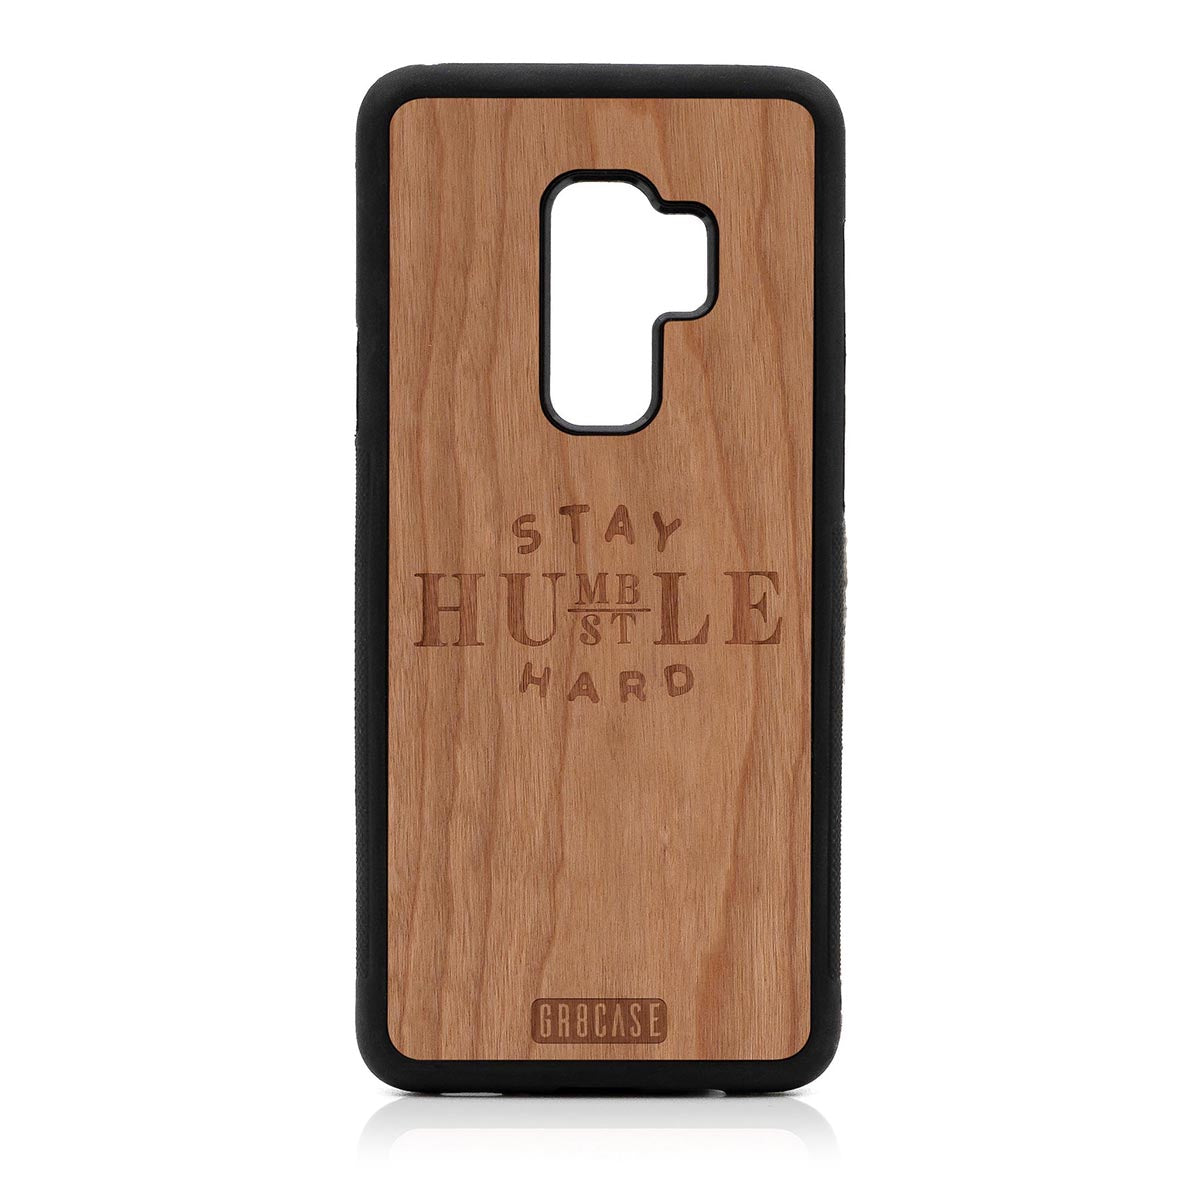 Stay Humble Hustle Hard Design Wood Case Samsung Galaxy S9 Plus by GR8CASE